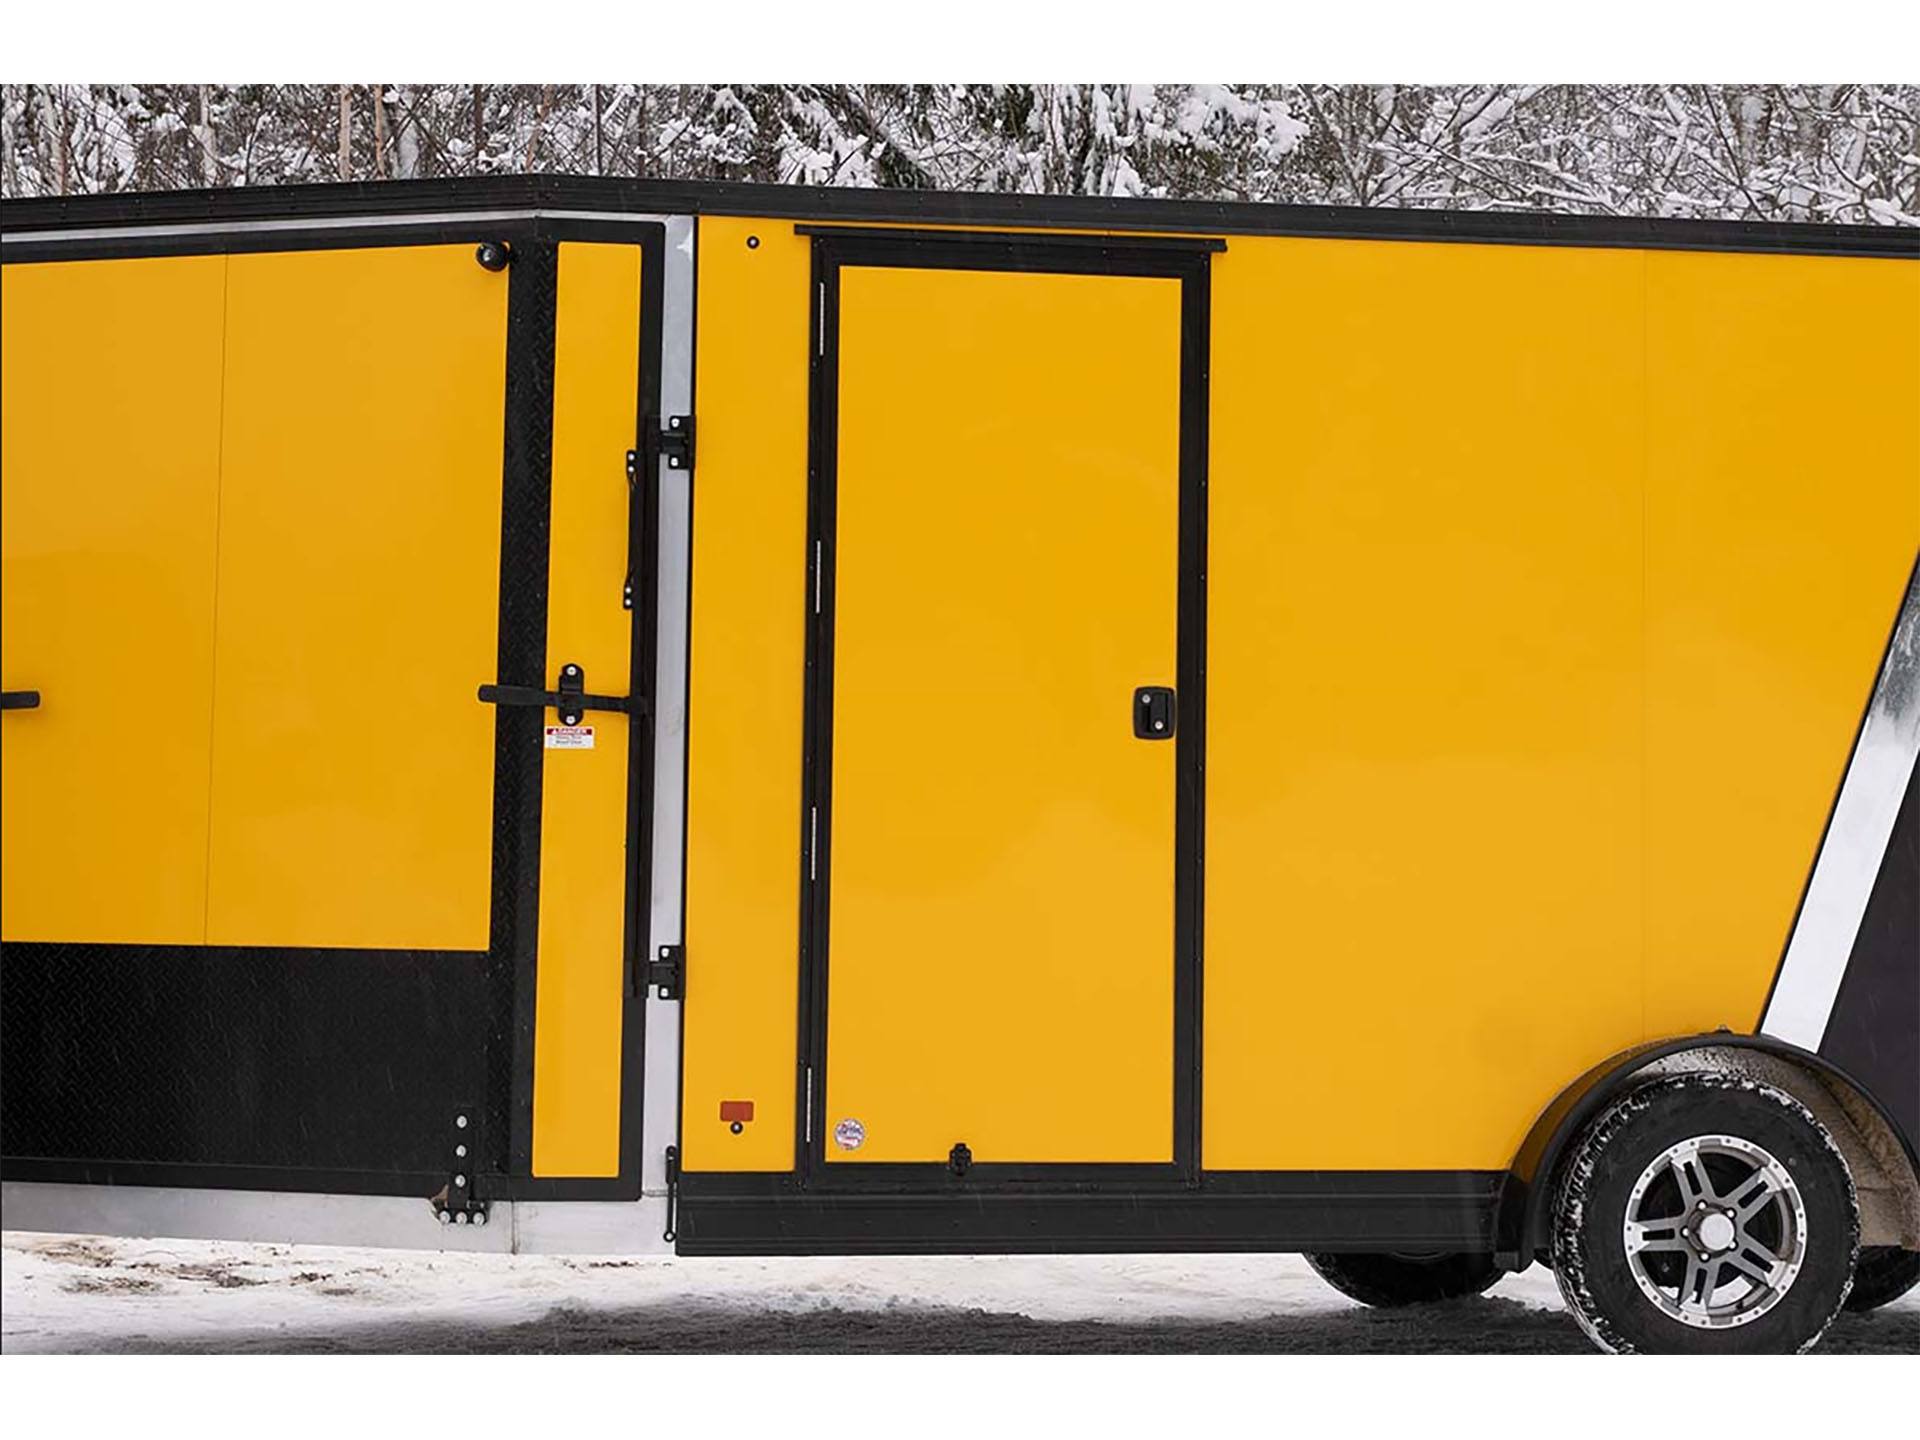 2024 Polaris Trailers Enclosed Elite Limited Snow Trailers 7.5 ft. Wide - 22 ft. Long in Lancaster, Texas - Photo 5